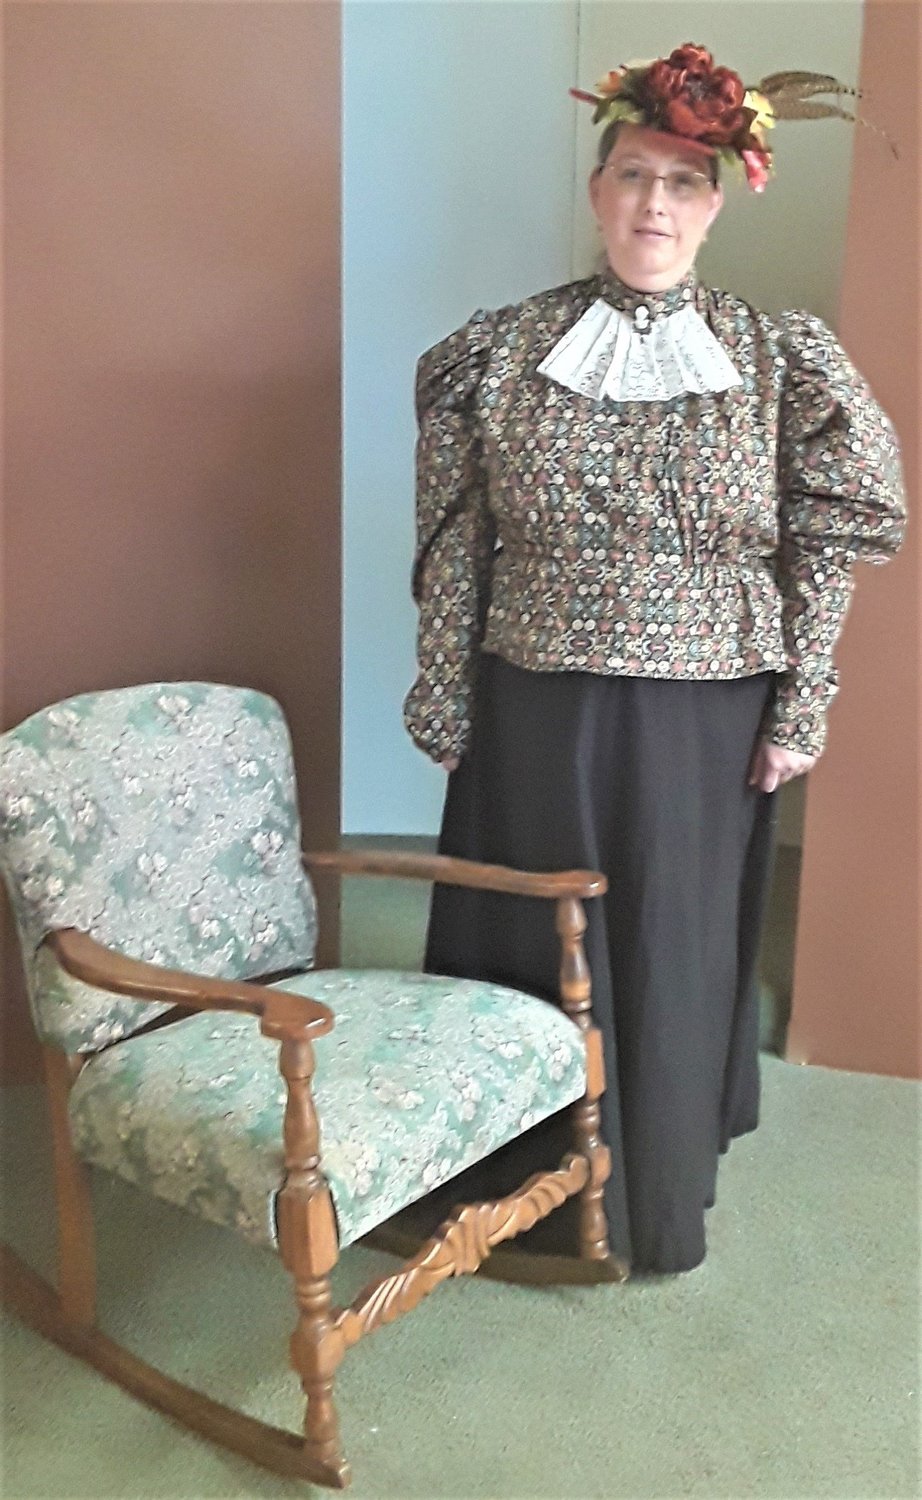 Meghan Berver stars as Lizzie Borden in ToadHall Productions’ “Murderess” at First Christian Church, 1809 El Paseo Road.